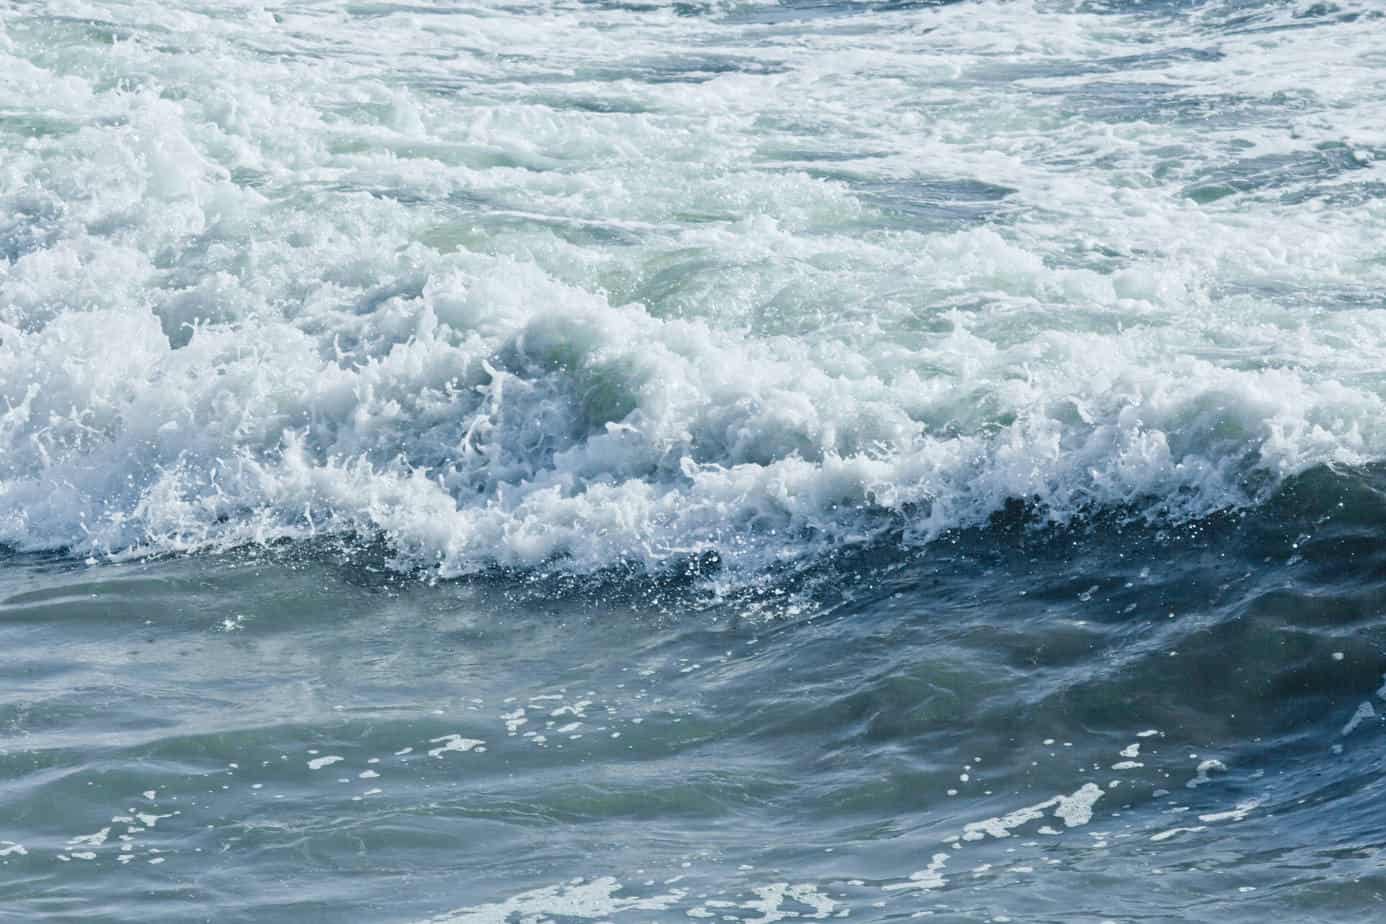 Know how to spot and avoid a riptide in an ocean or lake - Upworthy